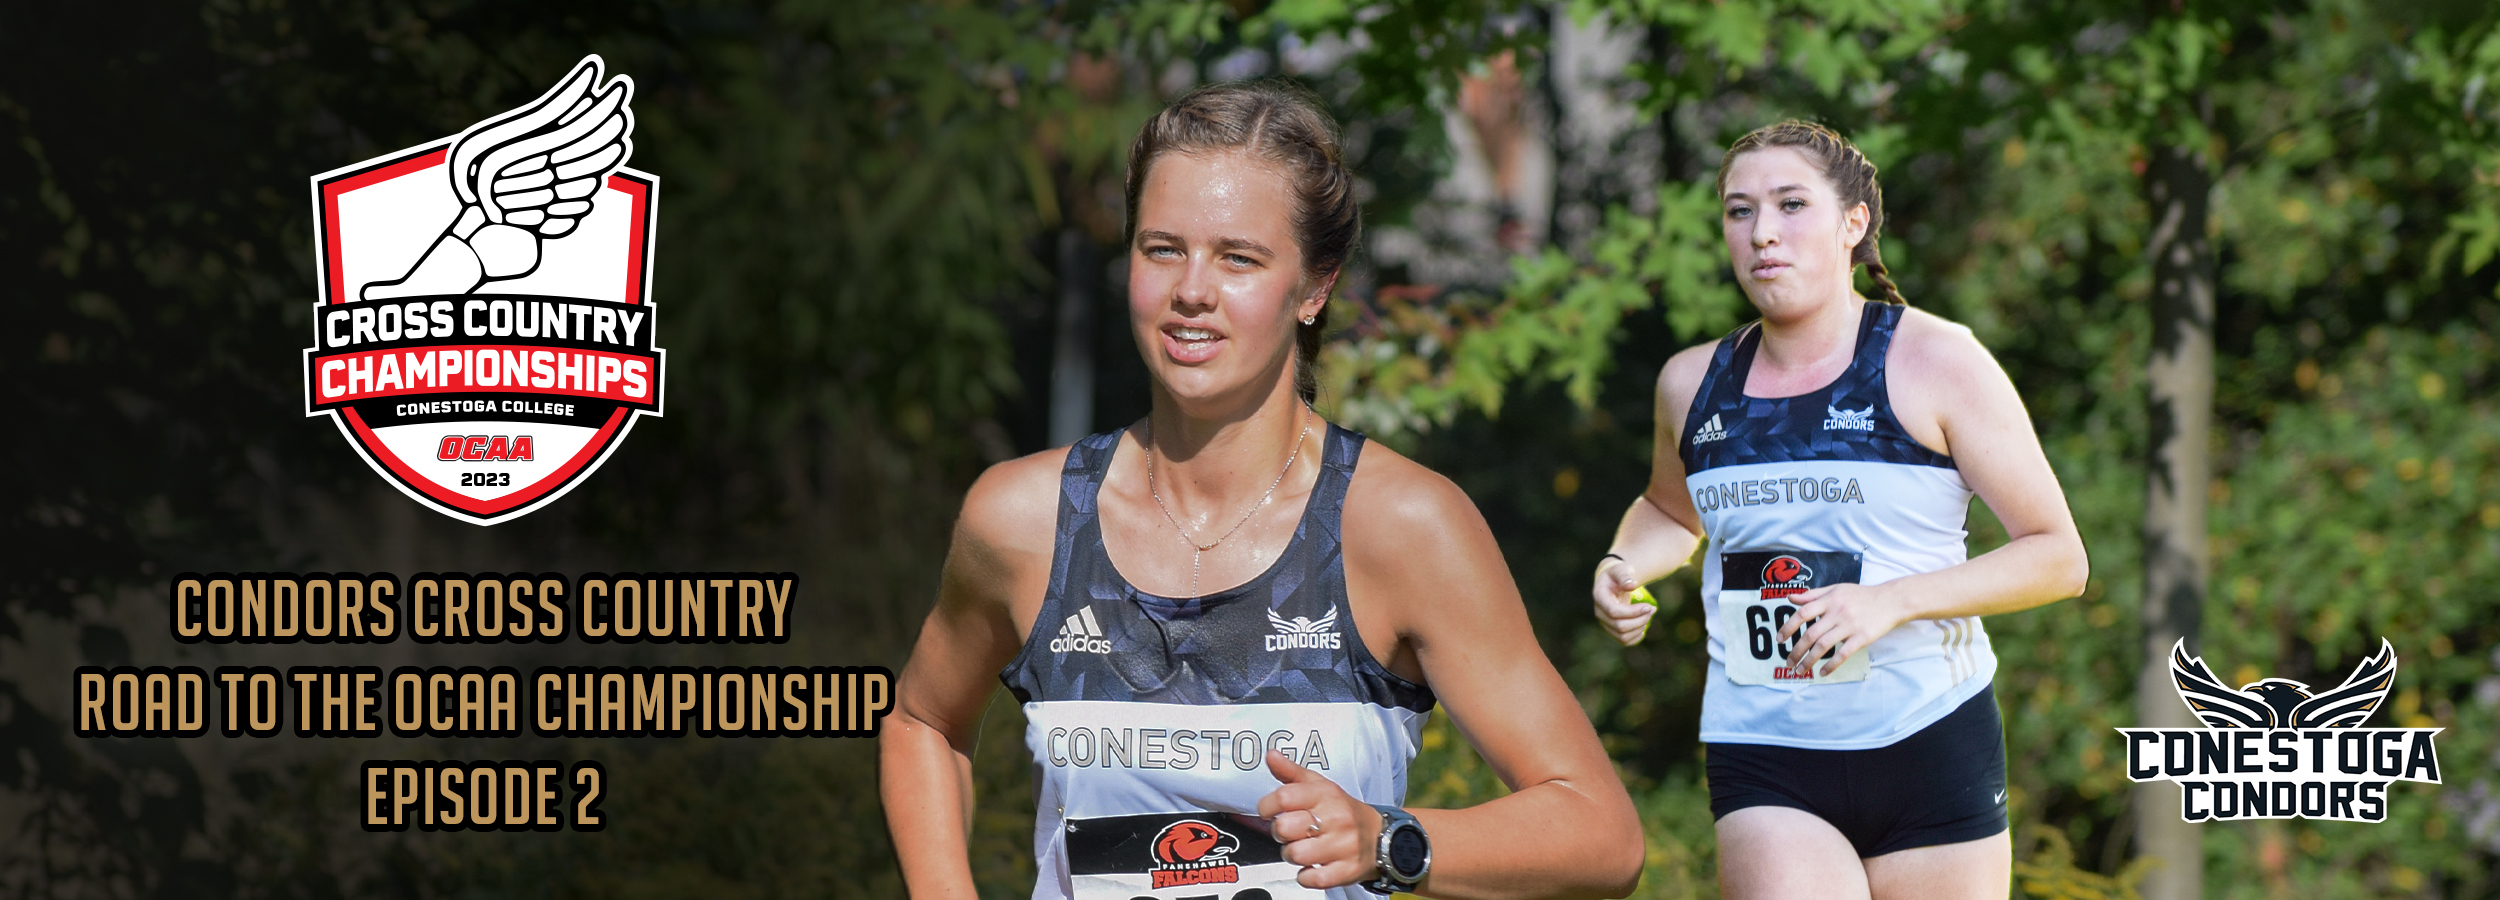 A headline banner reading Condors Cross Country Road to the OCAA Championship - Episode 2